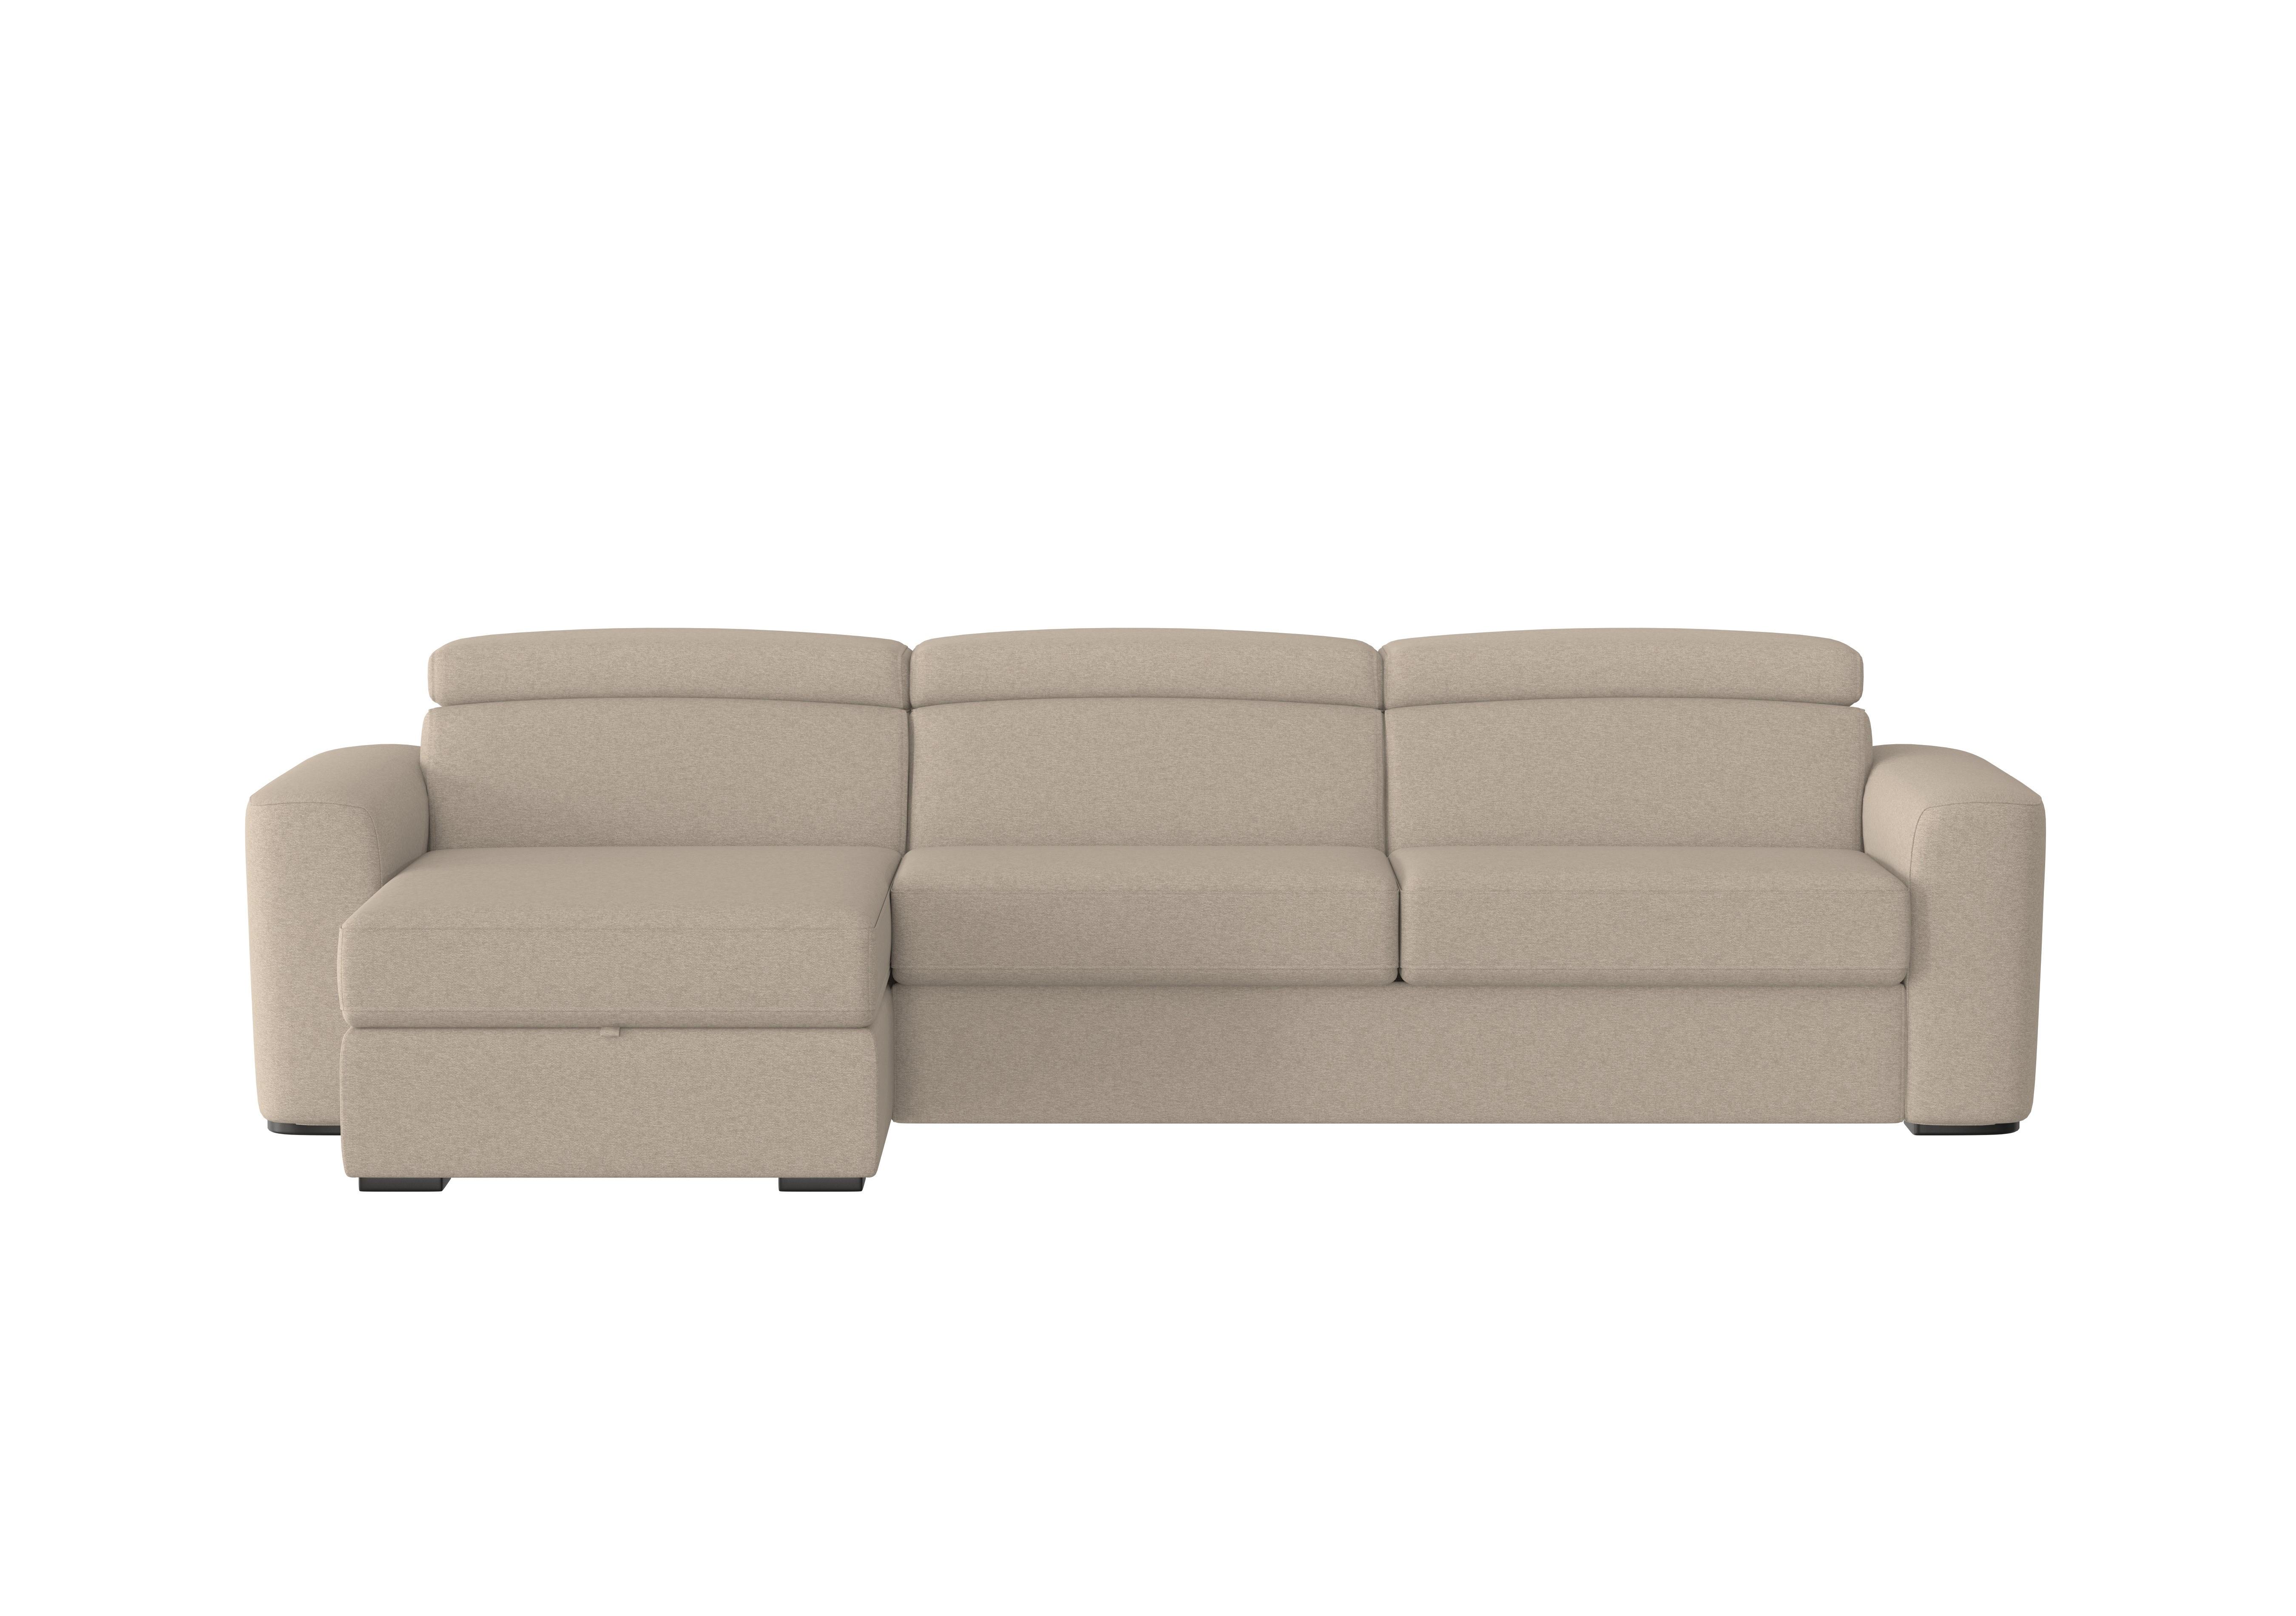 Infinity Fabric Corner Chaise Sofa Bed with Storage in Fab-Ska-R28 Beige on Furniture Village